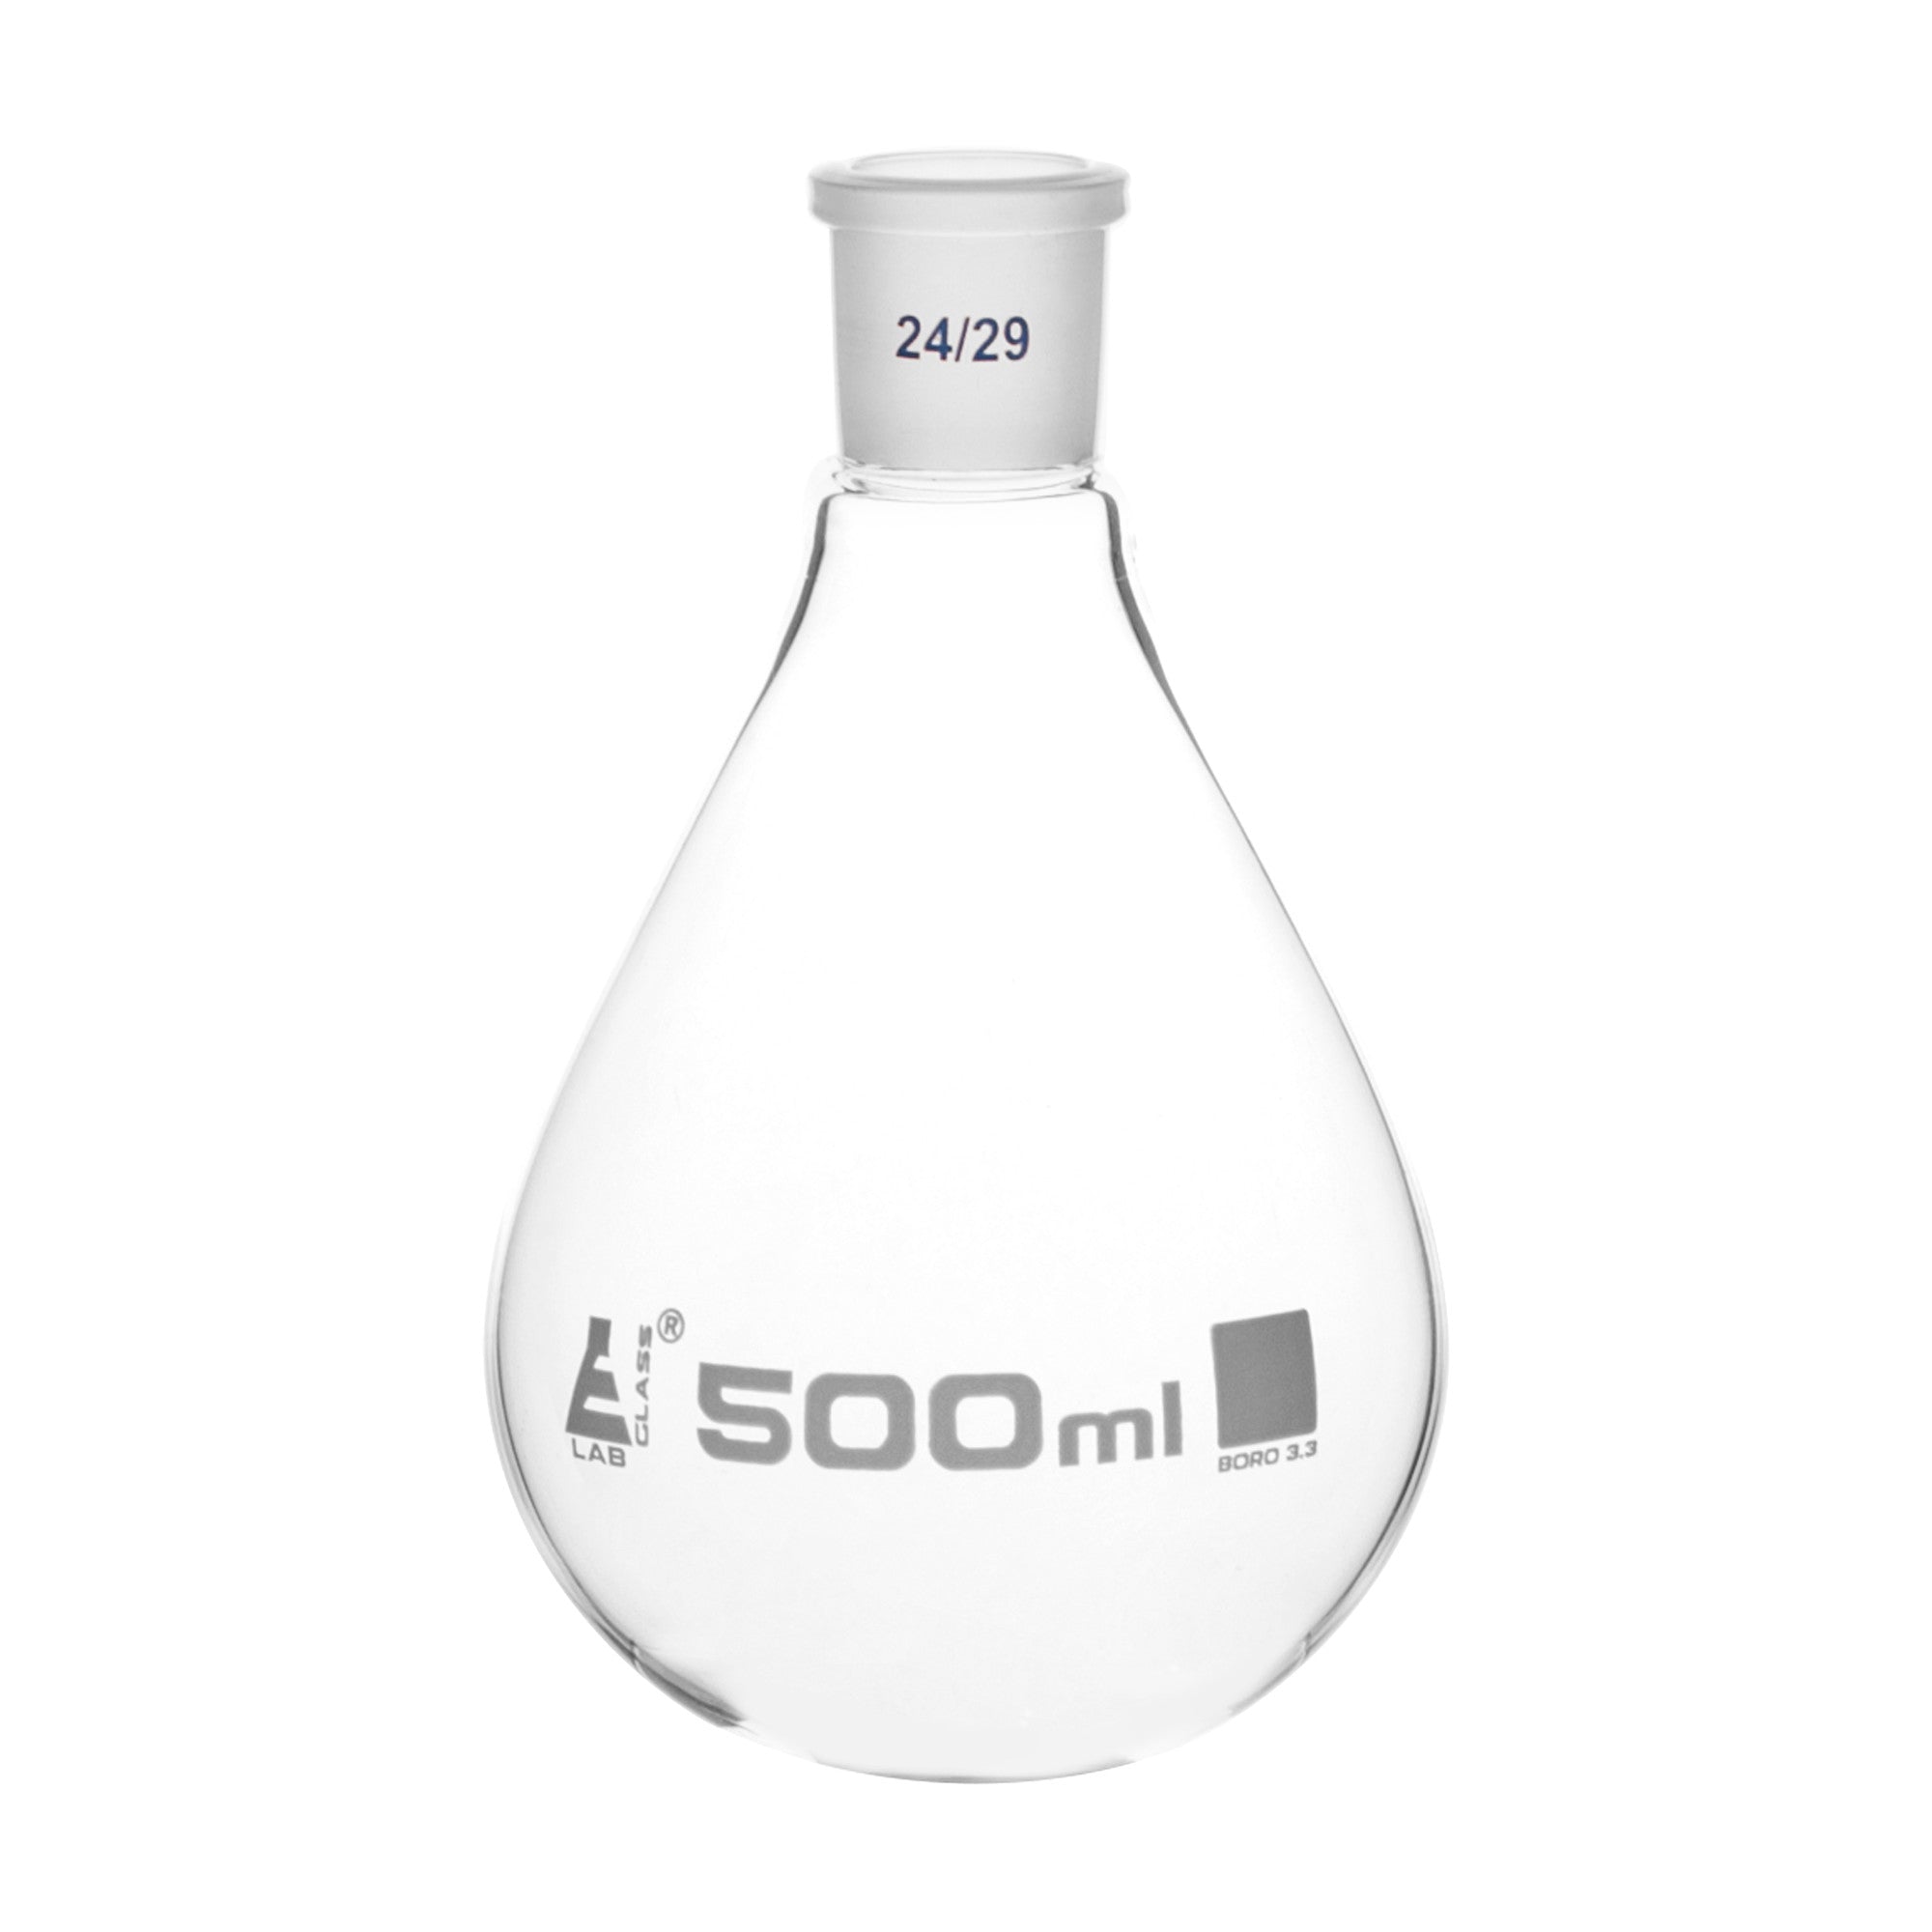 Borosilicate Evaporating Flask with Standard Ground Joint (24/29), 500 ml, Autoclavable